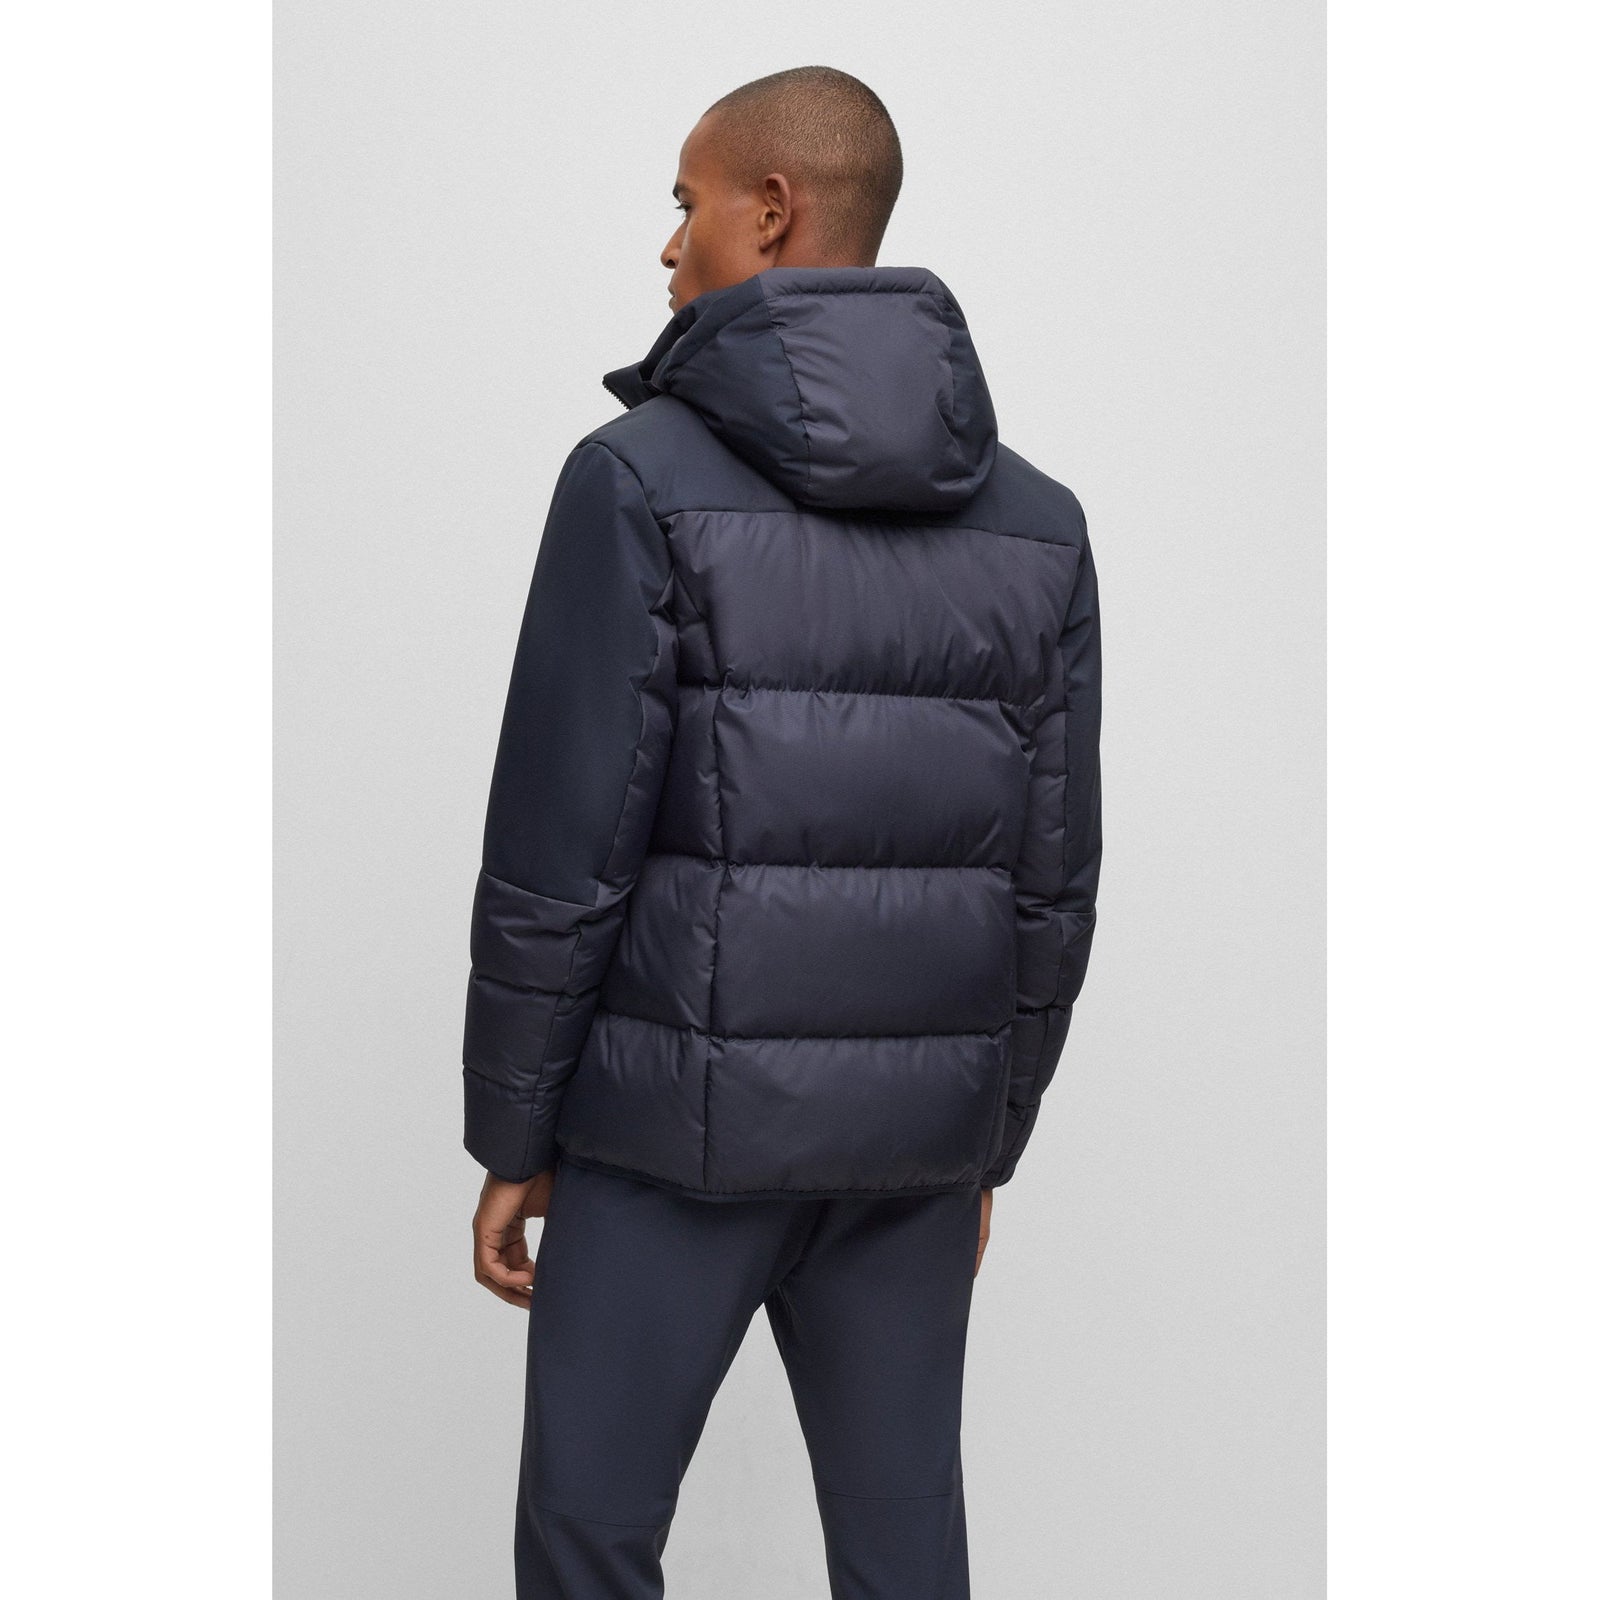 BOSS REGULAR-FIT WATER-REPELLENT DOWN JACKET WITH LOGO DETAIL - Yooto